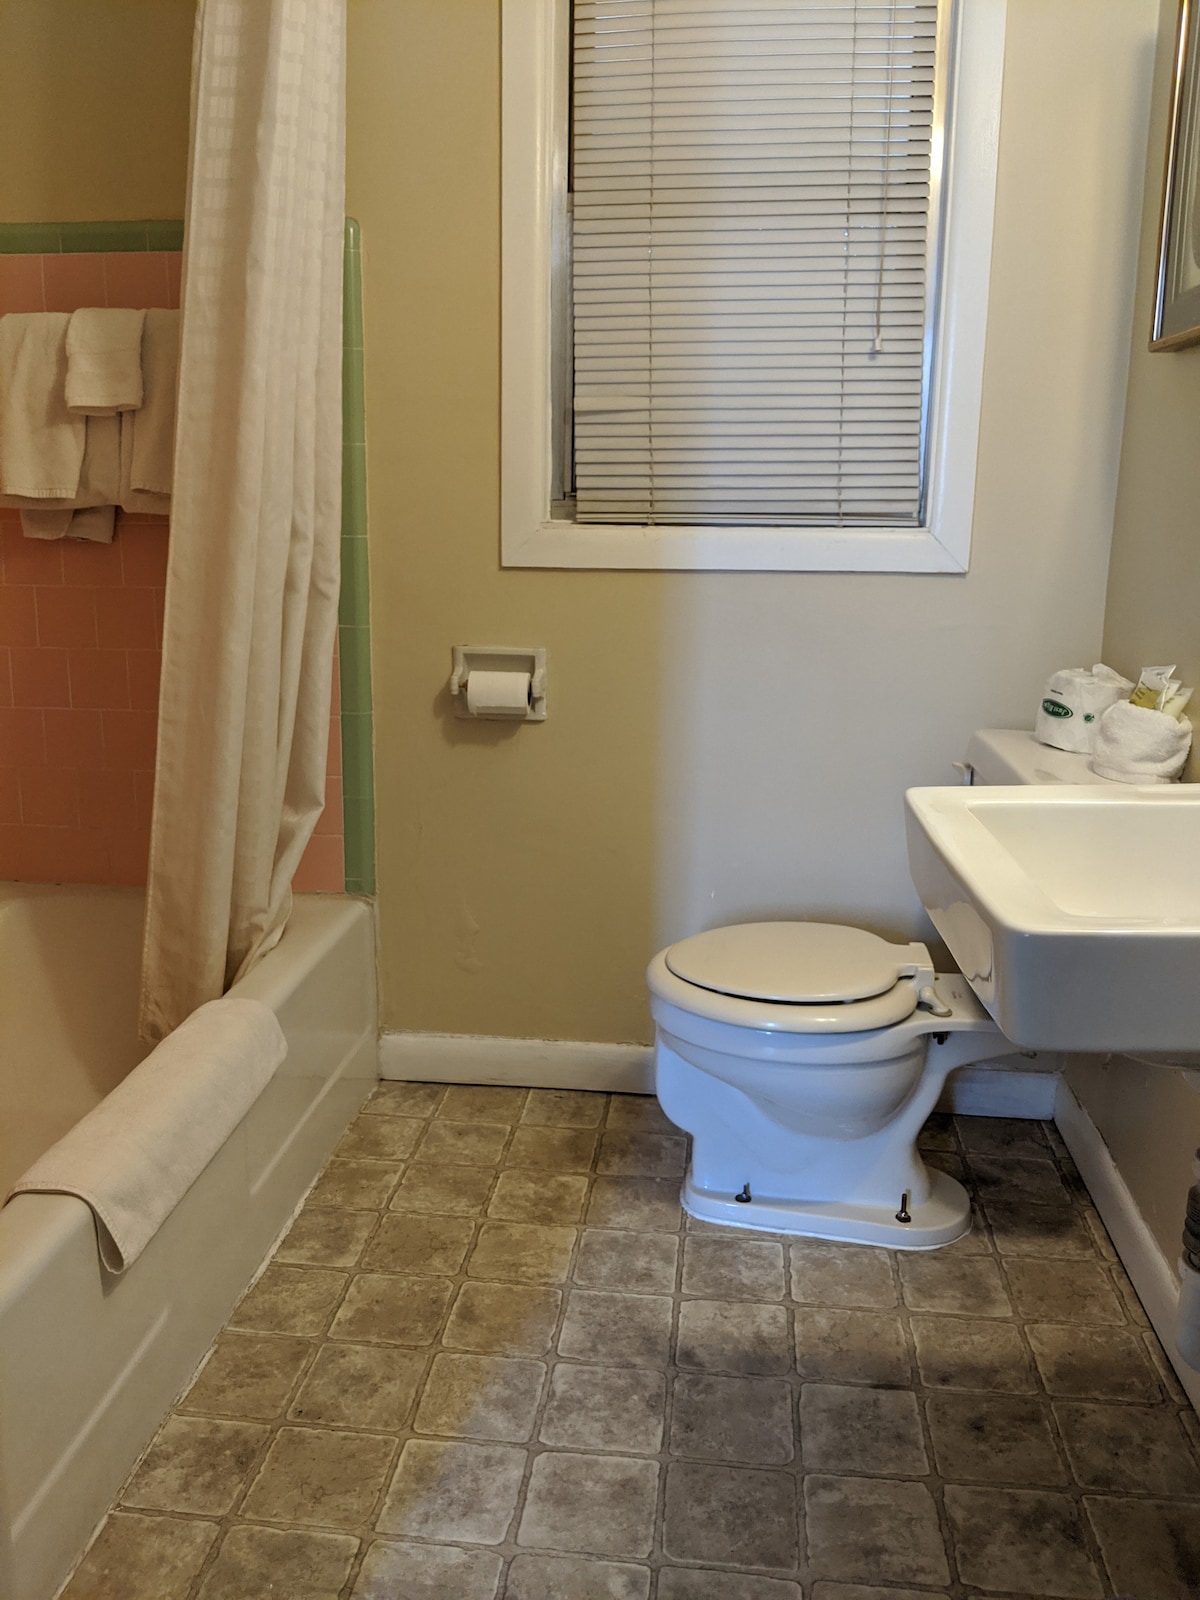 Kanab Affordable Stay Queen Bed Private Bath. #15